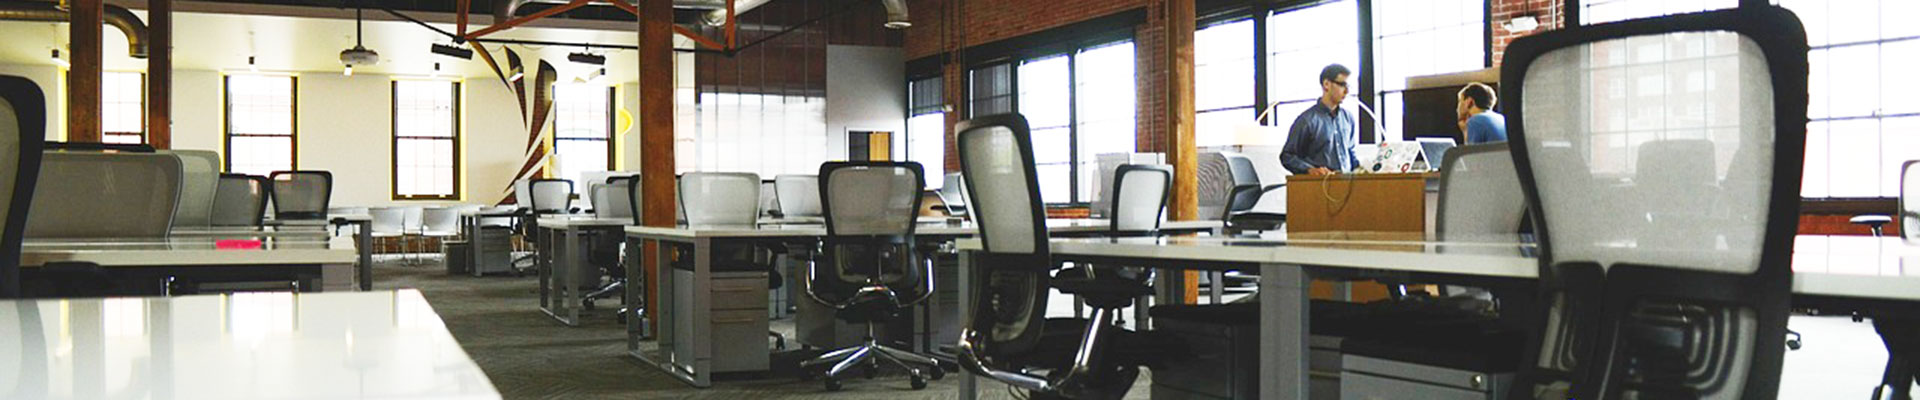 used office furniture prices guide